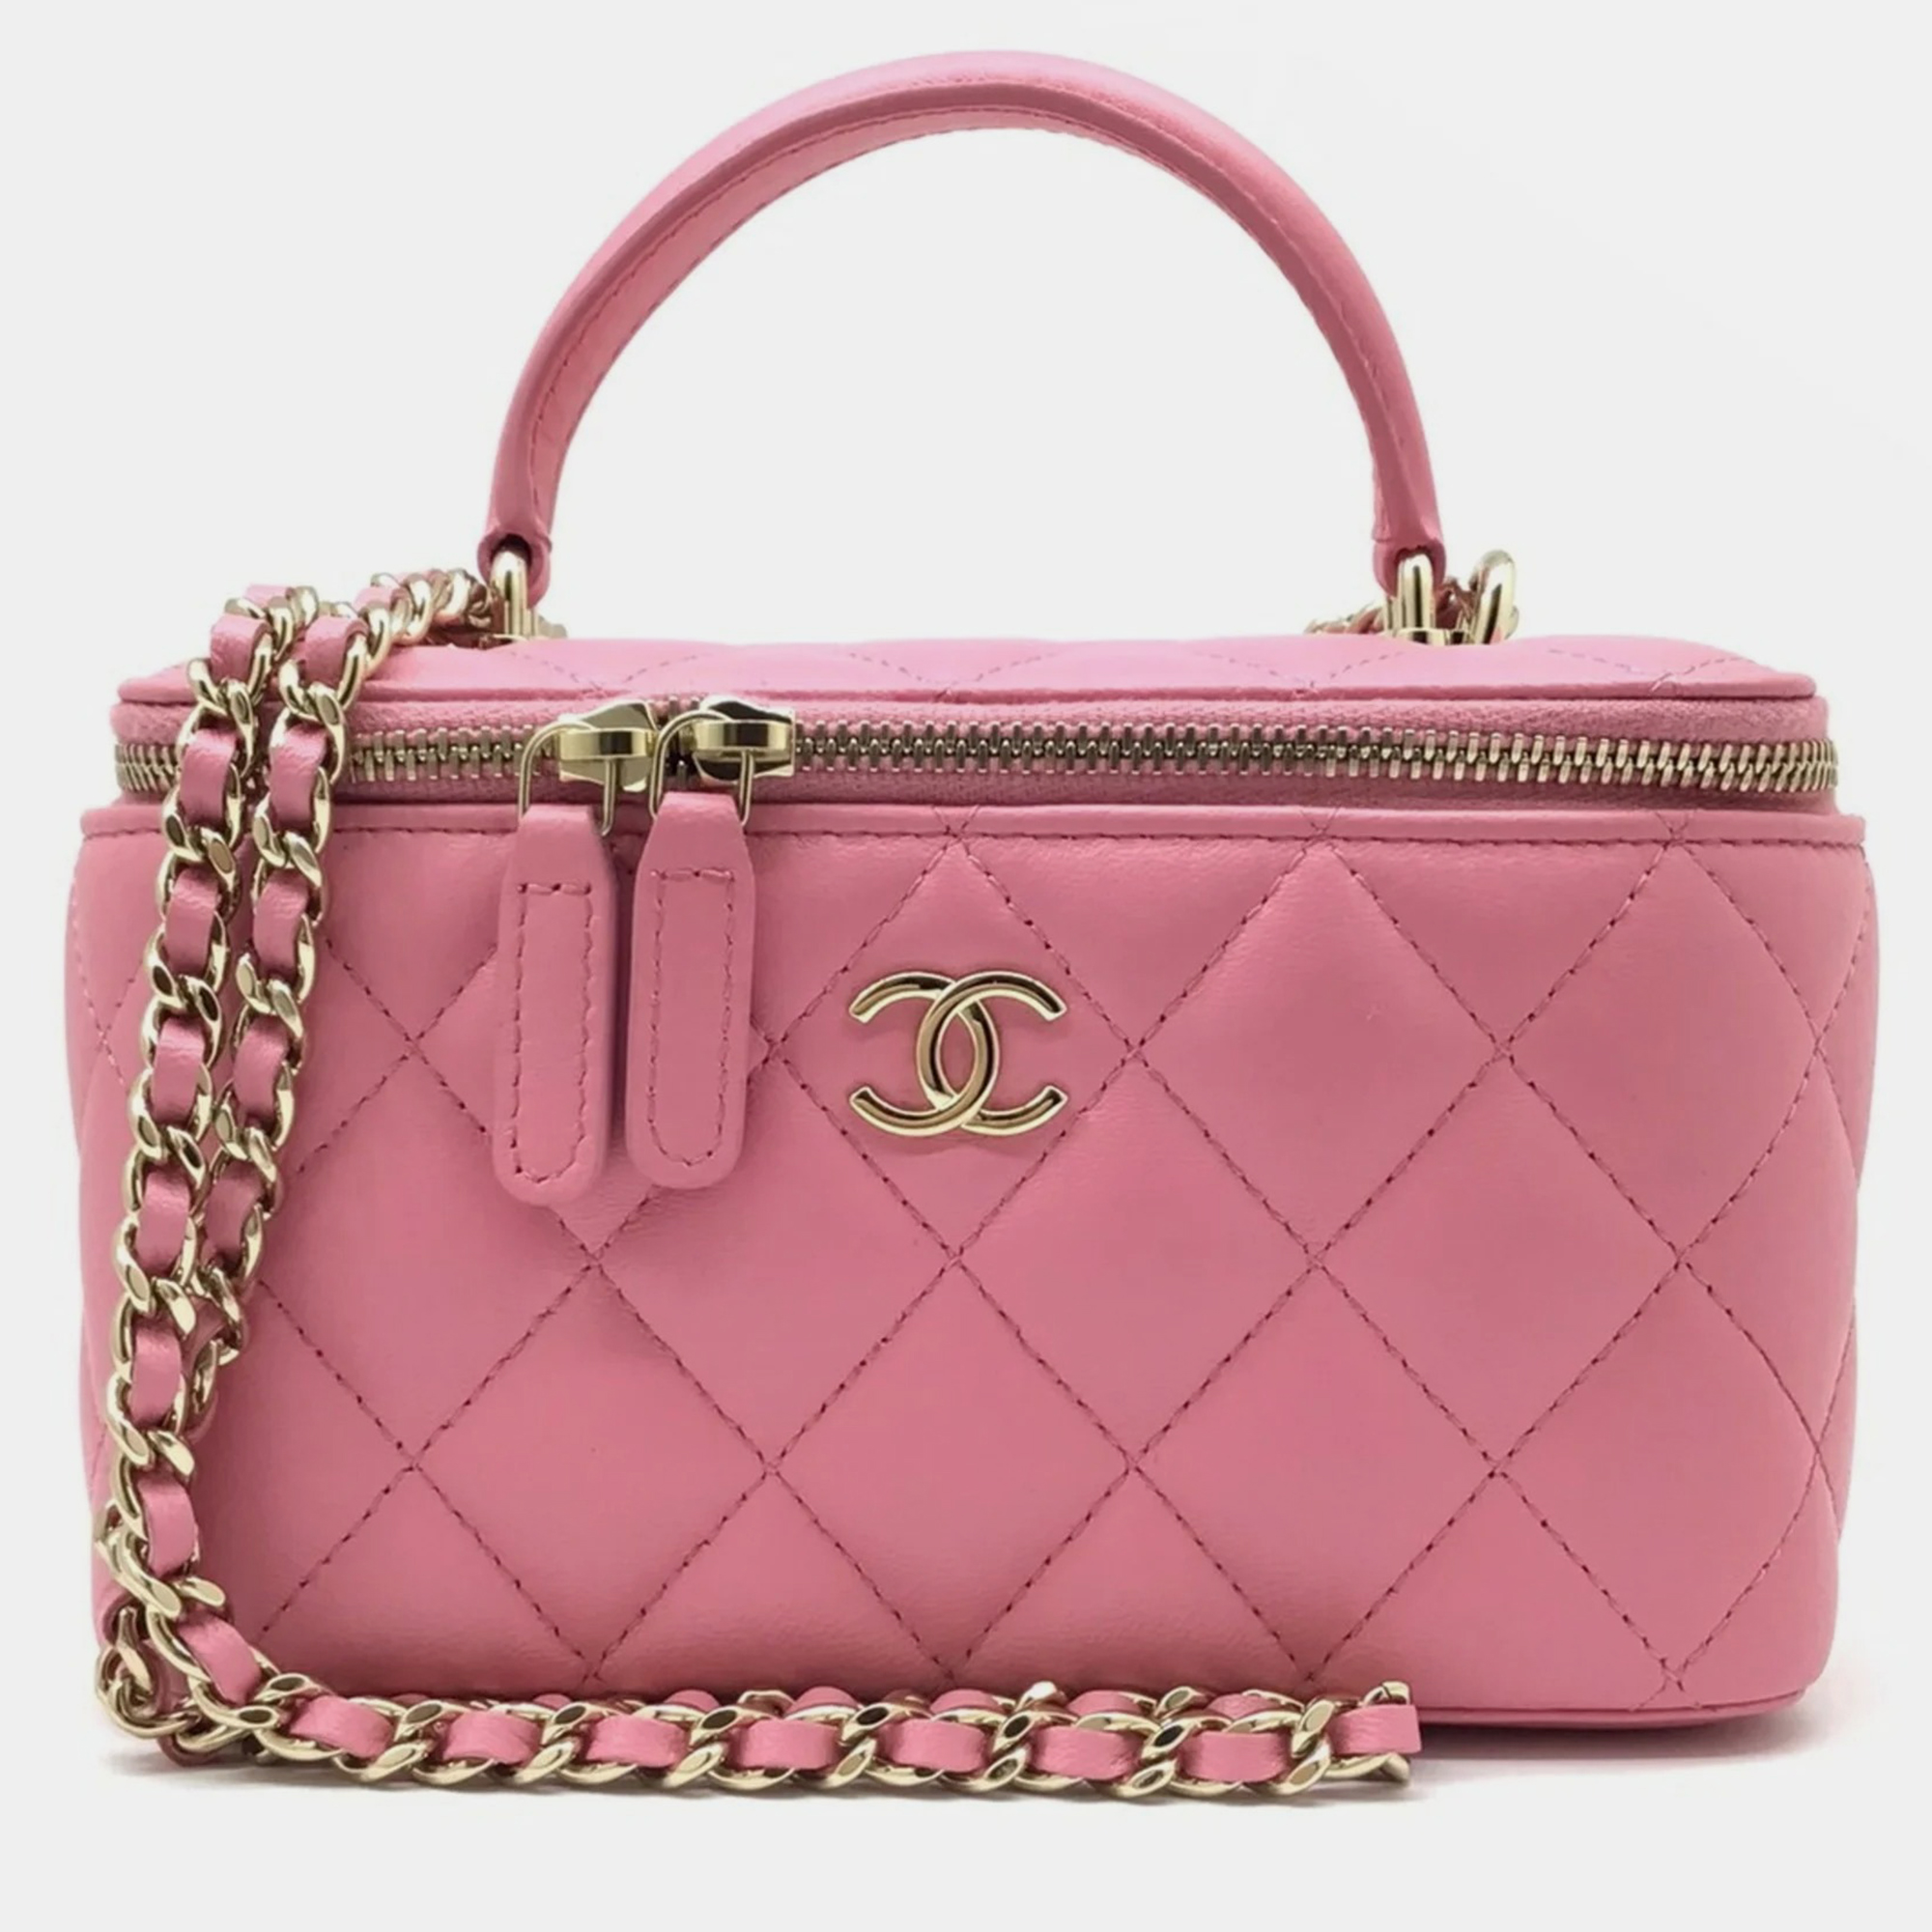 Chanel pink lambskin quilted small top handle vanity case